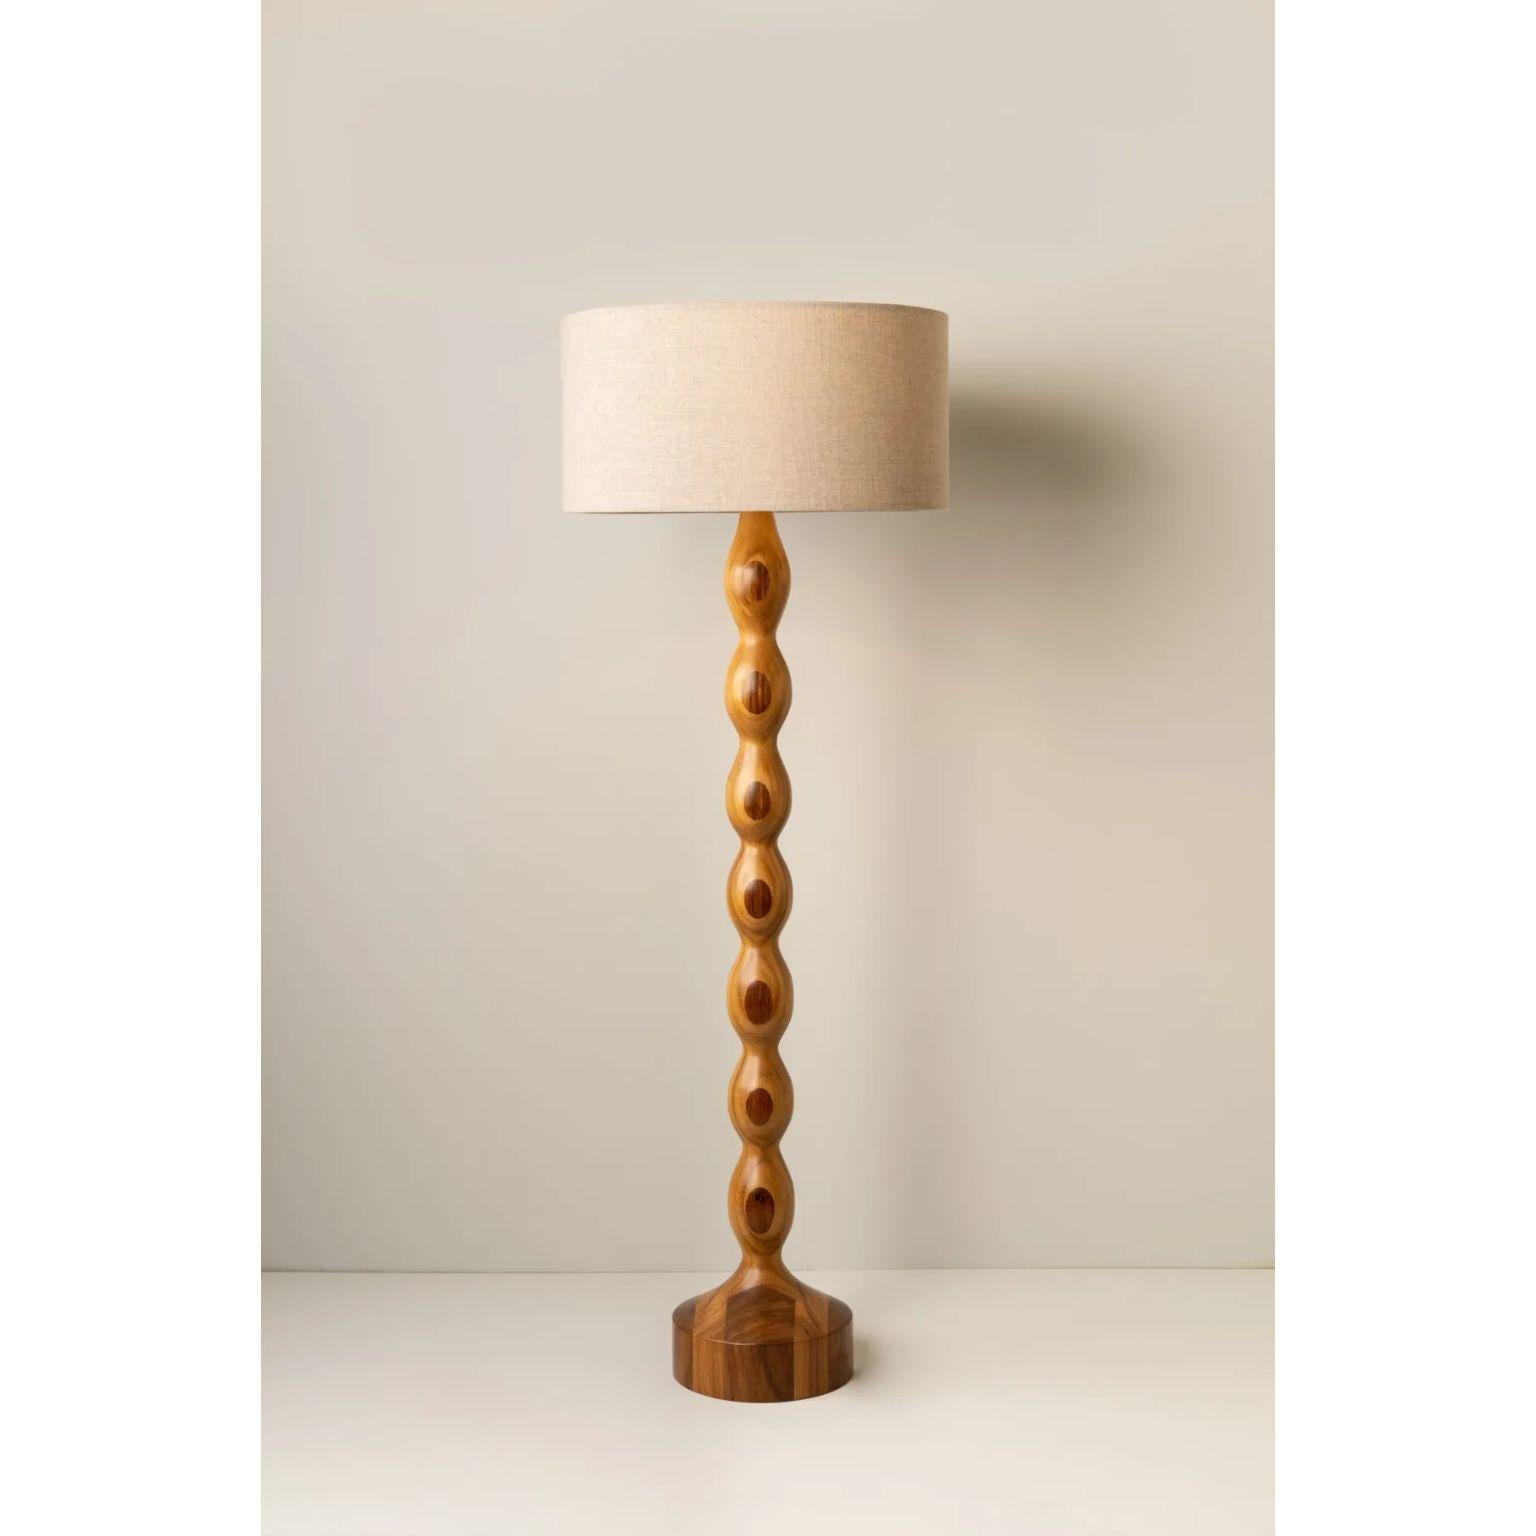 Tamarindo Floor Lamp by Isabel Moncada
Dimensions: Ø 60 x H 170 cm.
Materials: Turned parota wood, fiberglass and linen.

Its symmetrical undulated base is timeless with proportions and finishes that turn Tamarindo into an eclectic yet contemporary